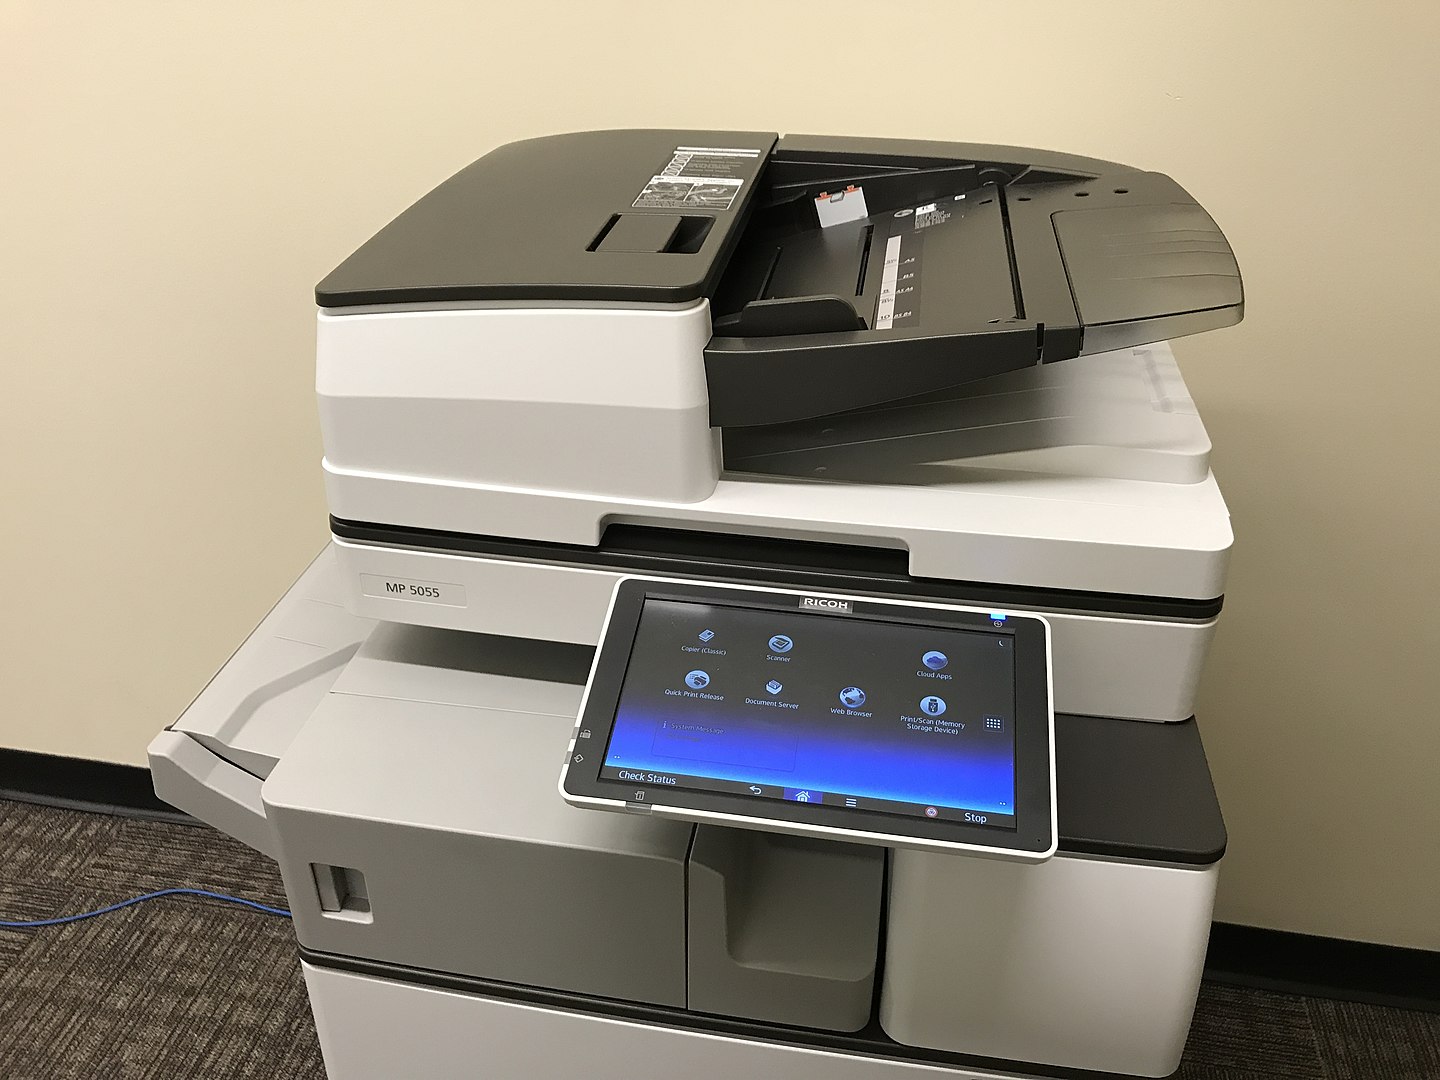 Photo of Ricoh 5055 B&W MFP by Grbrumder